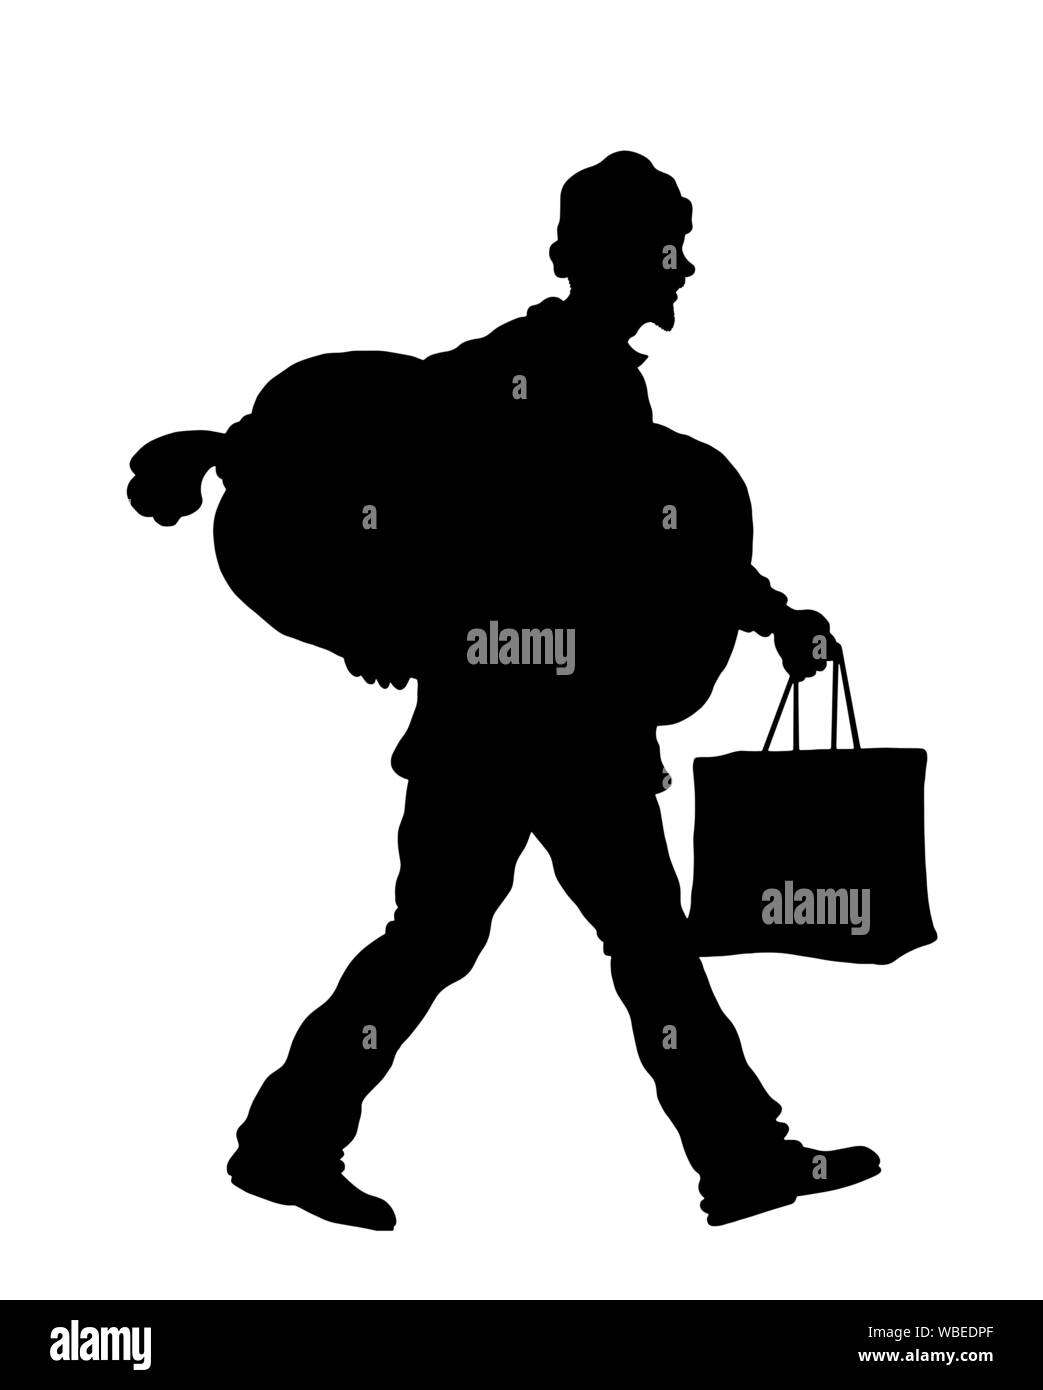 Refugee man silhouette with sack and bag. The silhouette objects and background are in different layers. Stock Vector